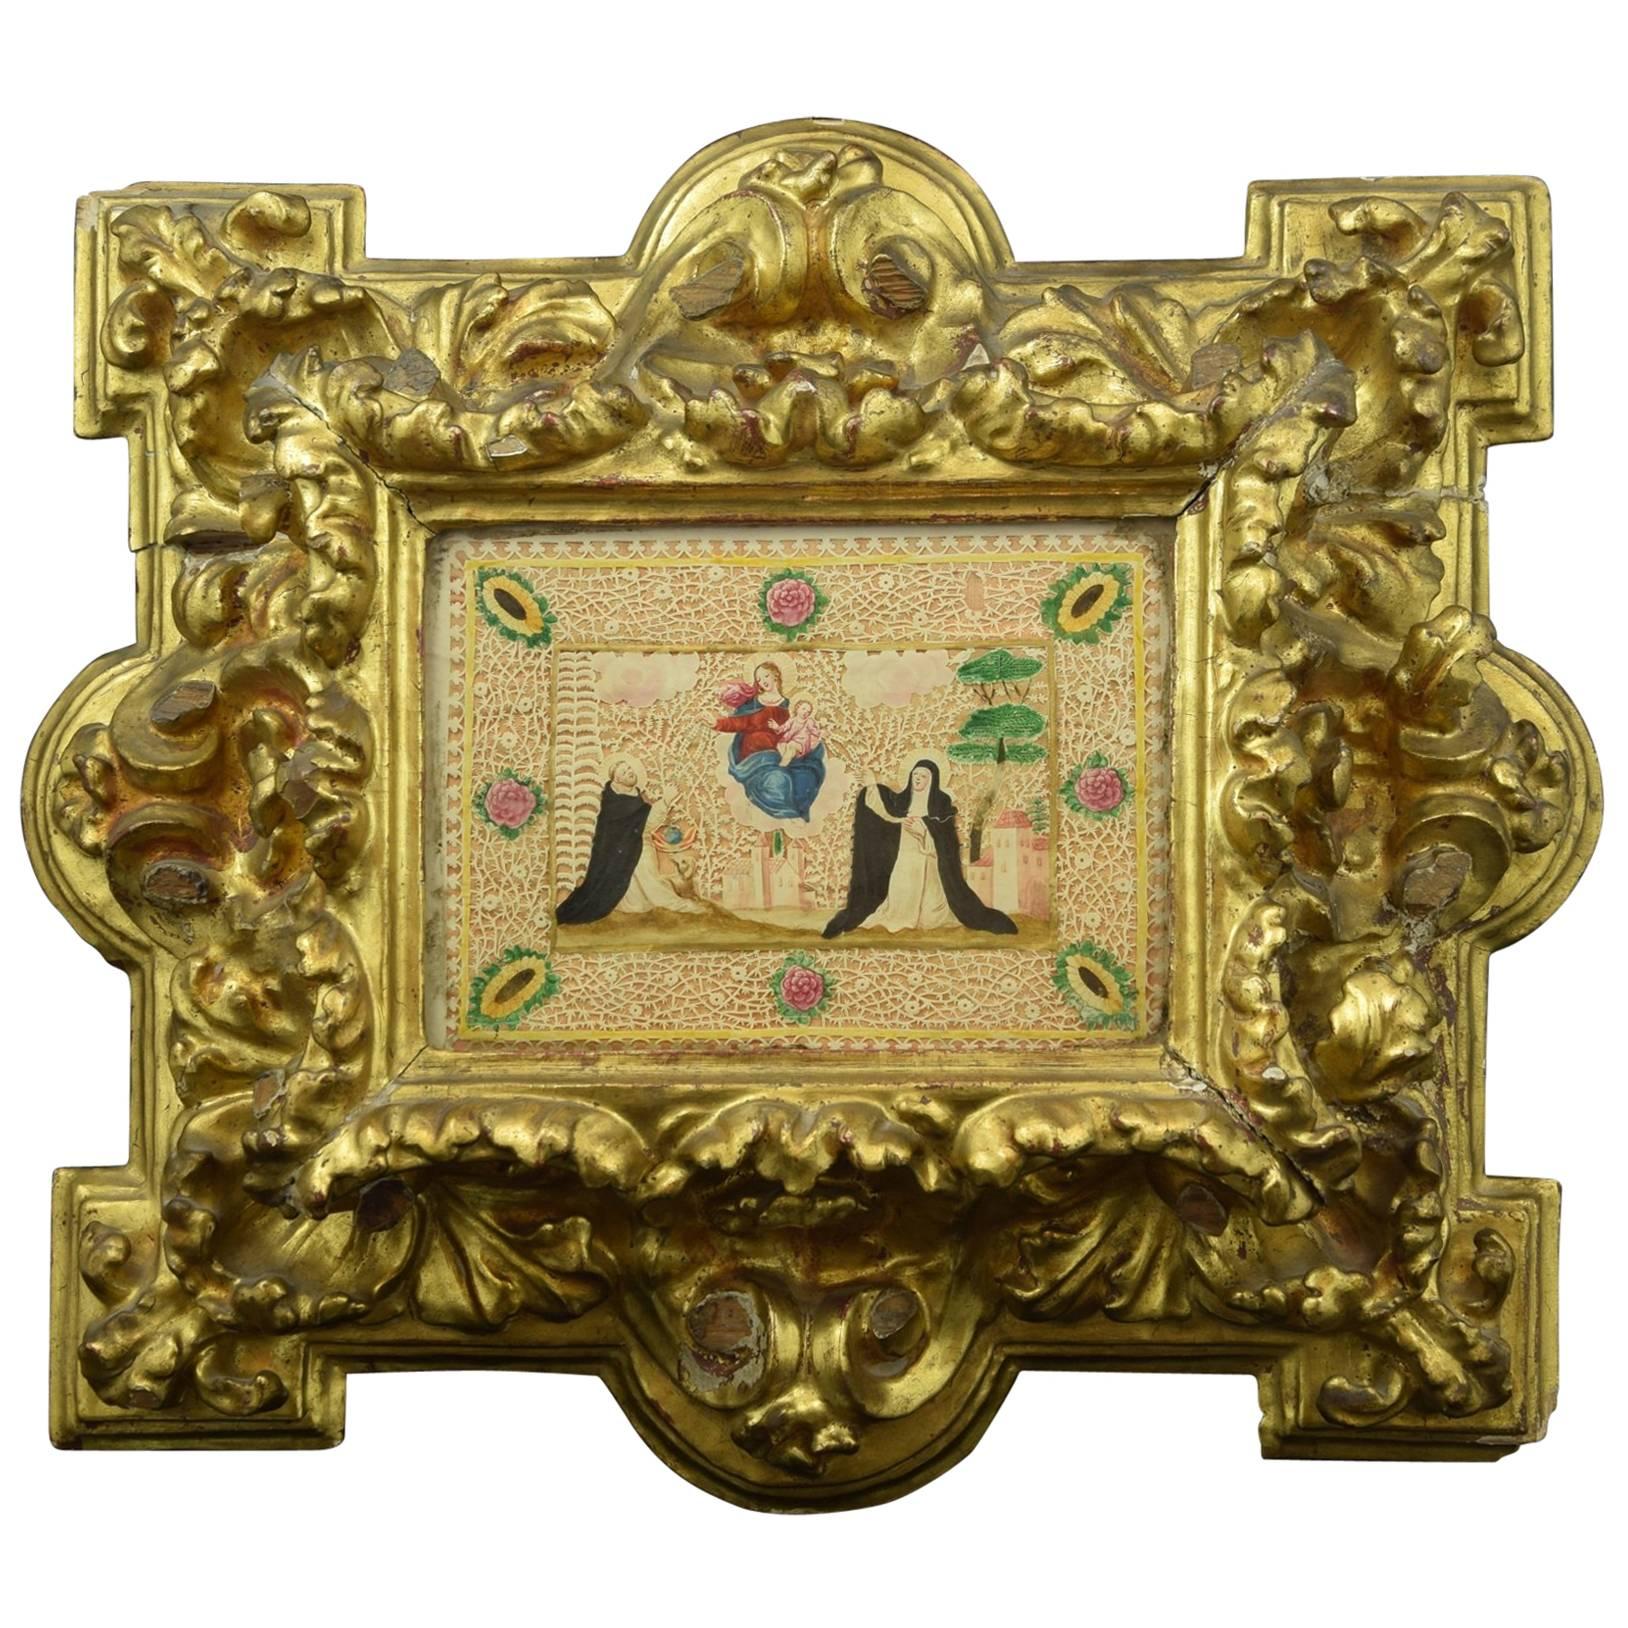 Frame with Vellum Painting, 17th Century